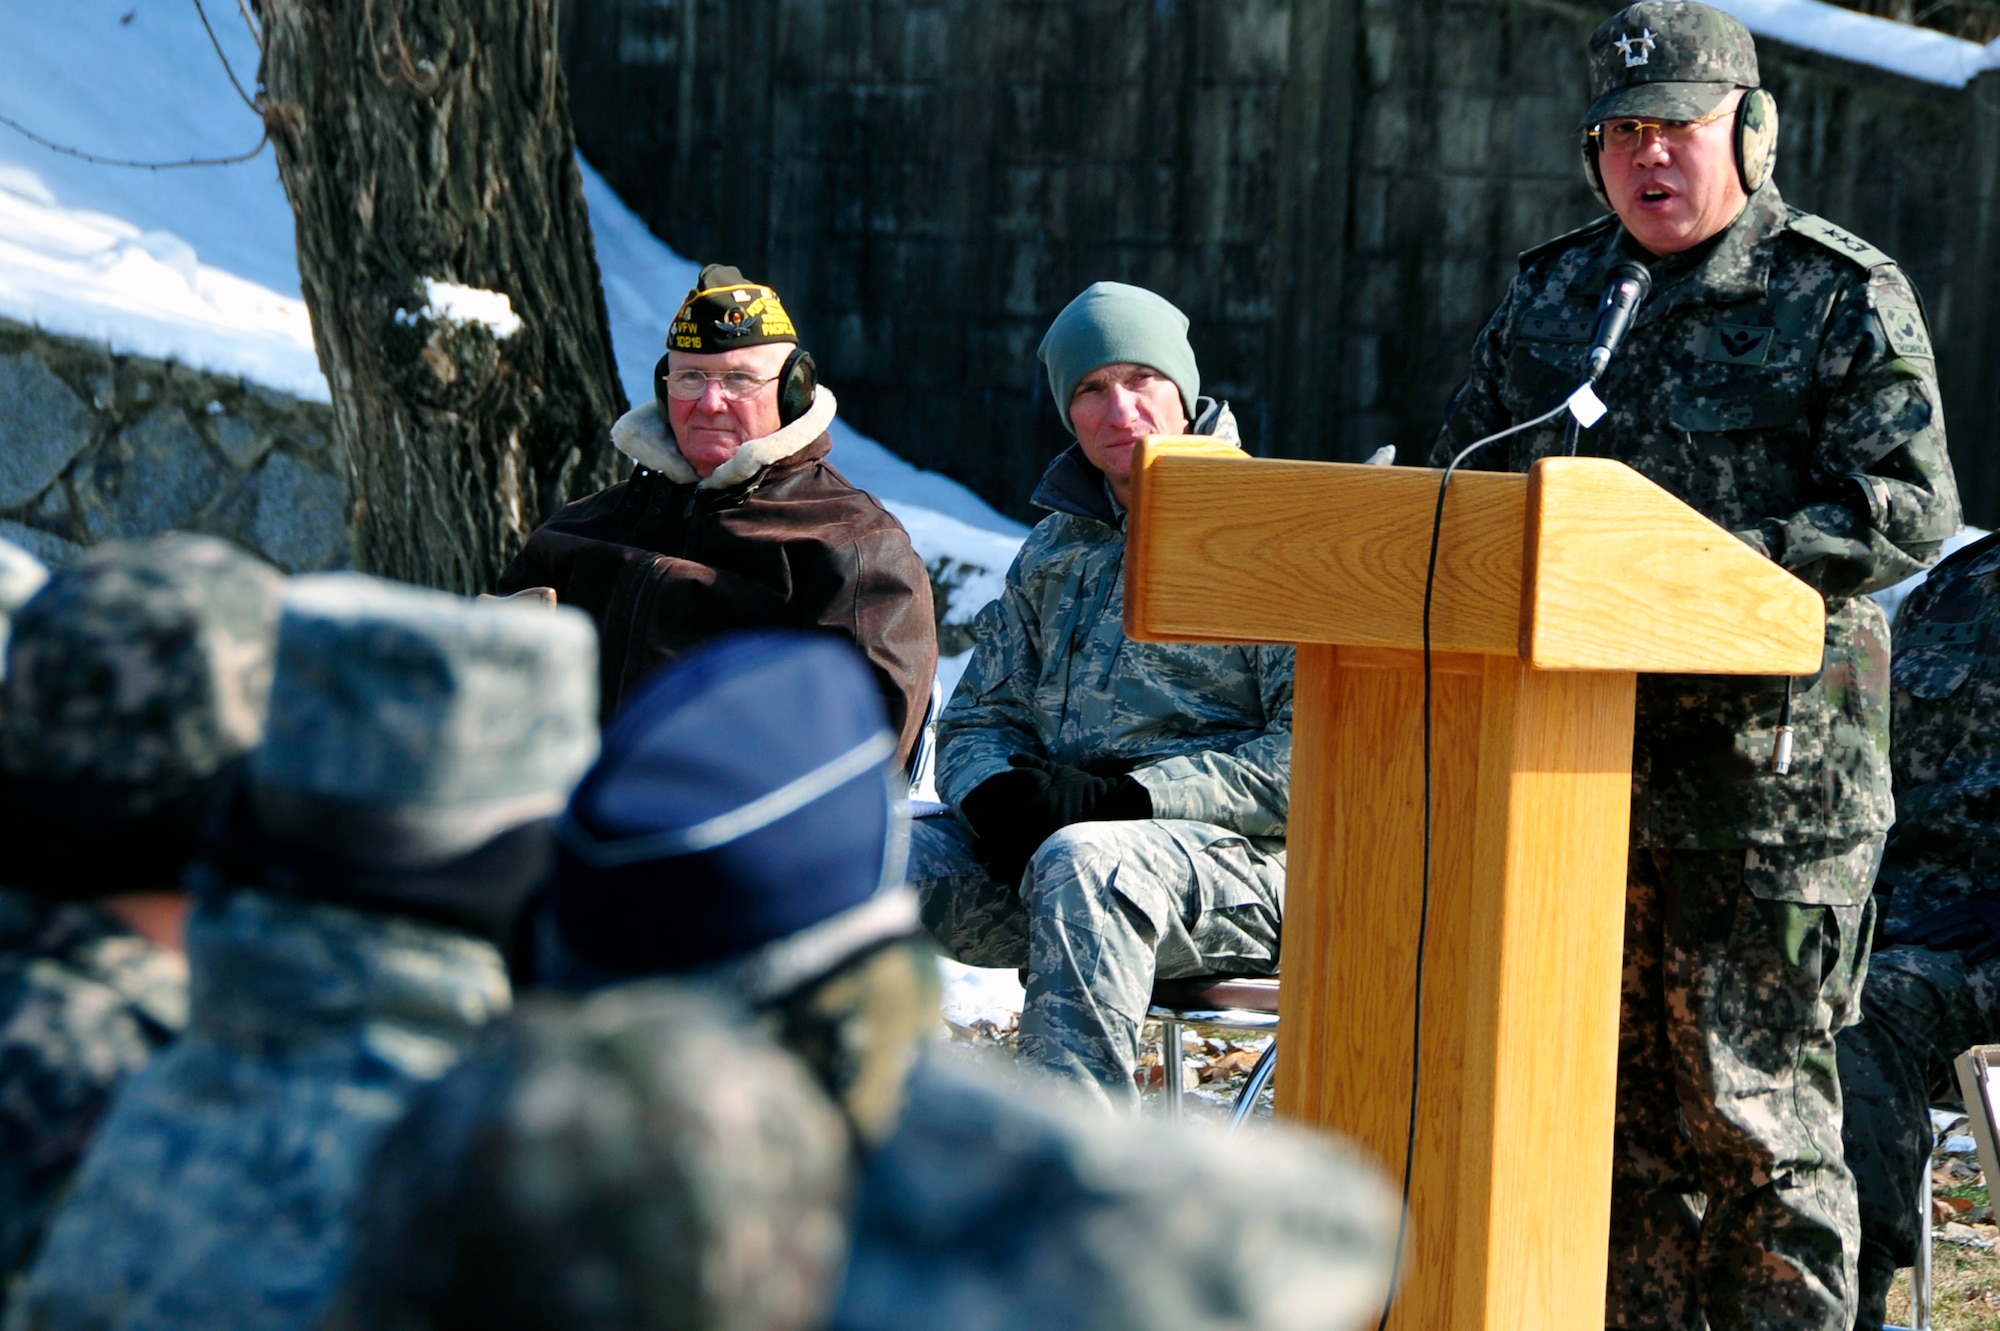 Maj. Gen. Chun, In-Bum, ROK/United States Combined Forces Command and deputy chief of staff of the Operation of Ground Component Command, speaks at the 62nd Anniversary of the Battle of Bayonet Hill Commemoration Ceremony Feb. 7, 2013, at the Hill 180 Site, Osan Air Base, and Republic of Korea.  The ceremony commemorated the bravery of the men who conquered the hill in a battle against the Chinese in 1951. (U.S. Air Force photo/Airman 1st Class Alexis Siekert)